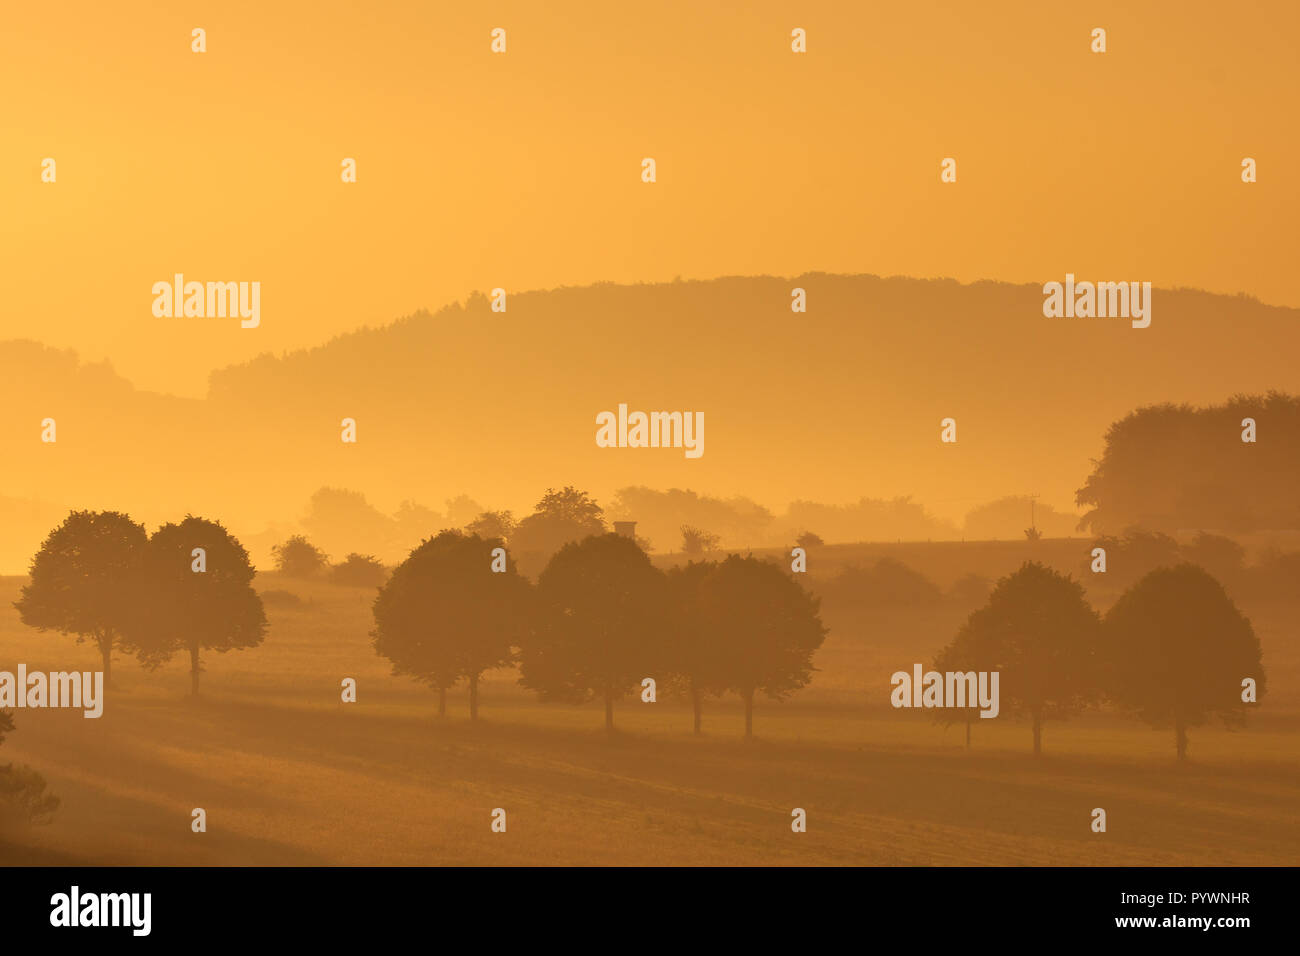 Row of trees in the hills during misty sunrise in german agricultural landscape Stock Photo